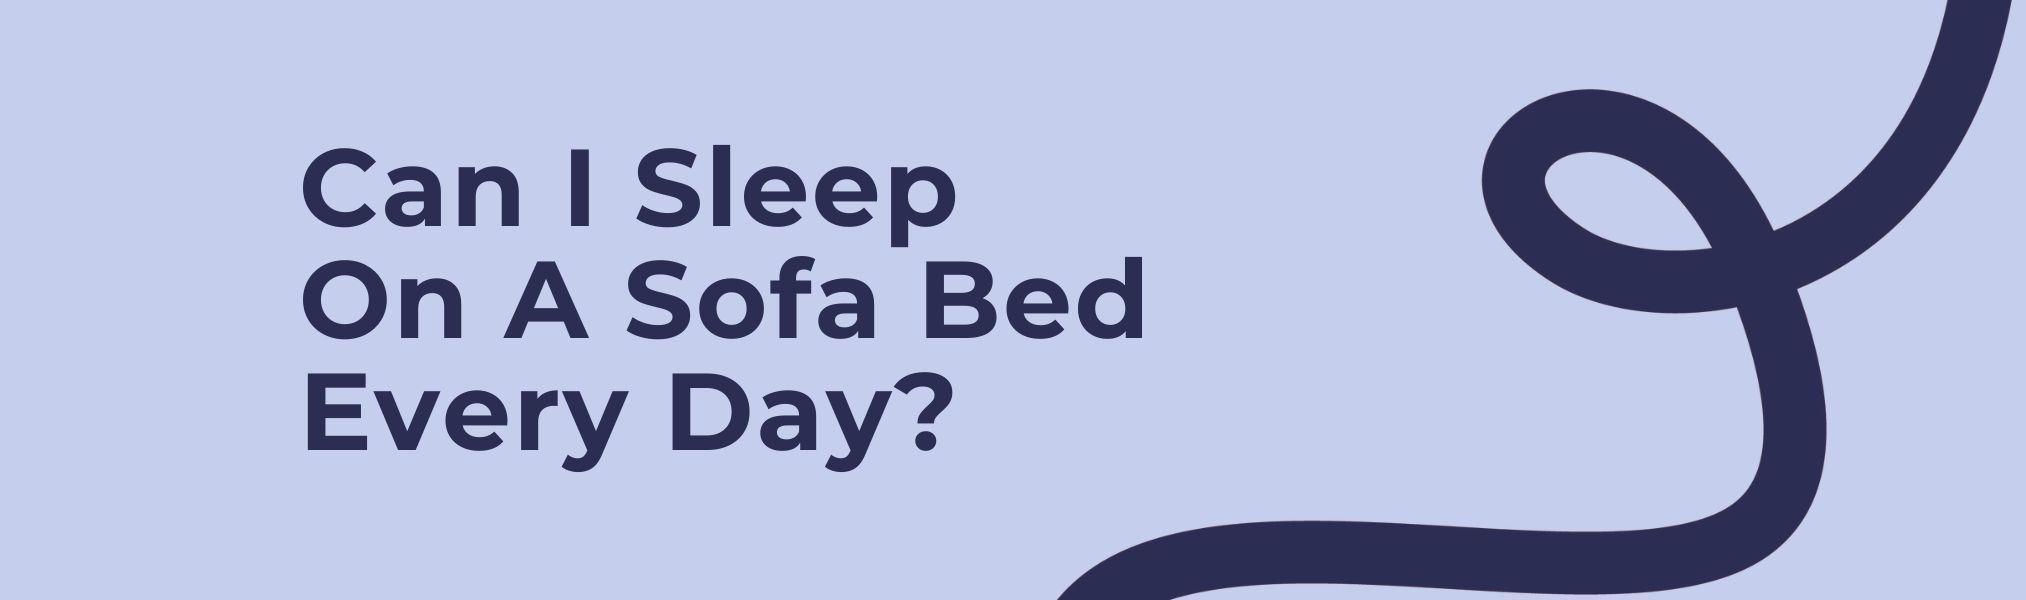 Can I Sleep On A Sofa Bed Every Night? | Happy Beds